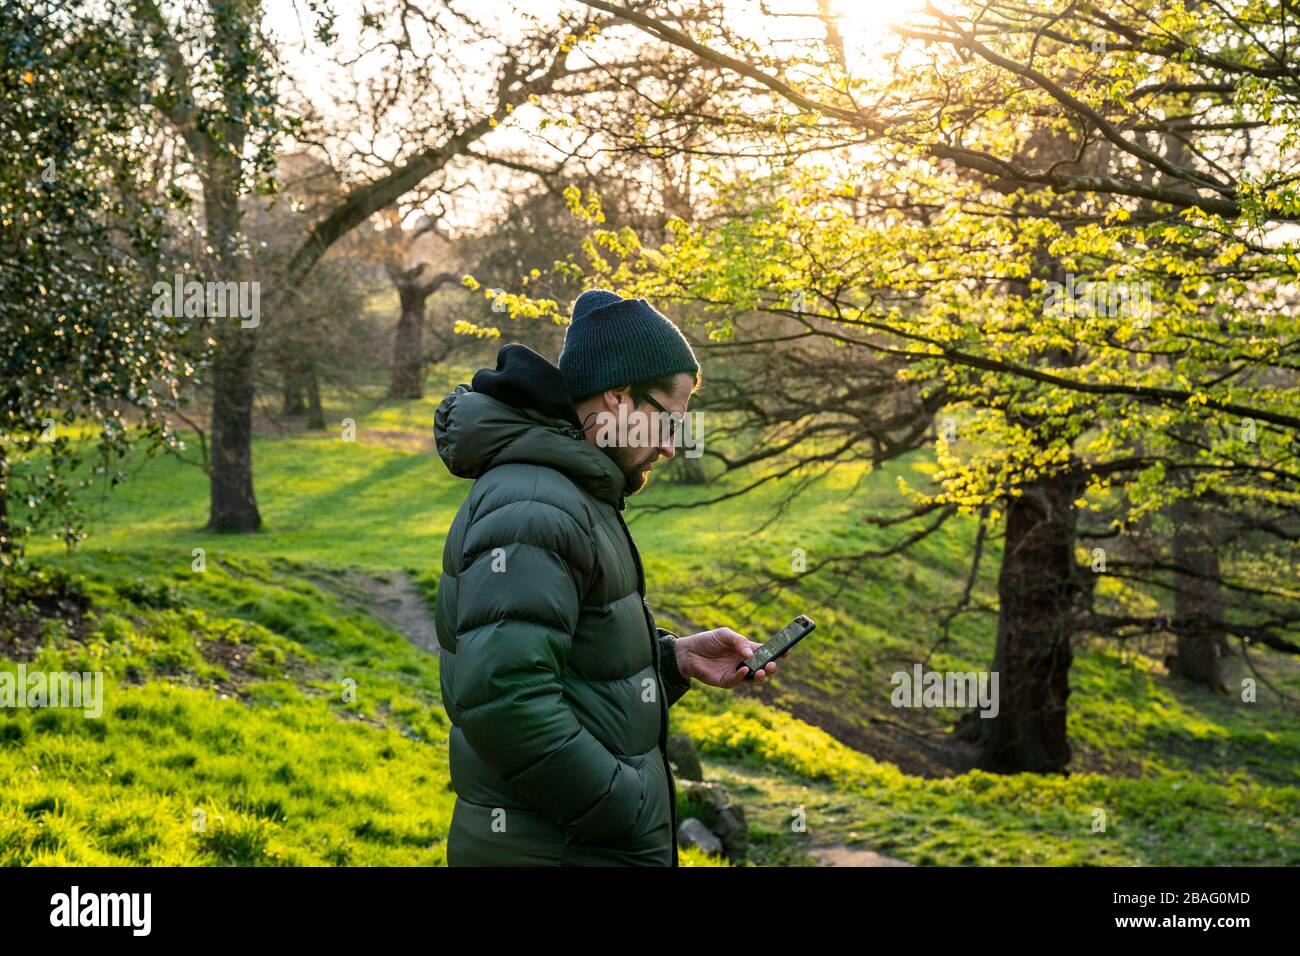 Social distance exercising in Greenwich Park.  Mid 40's male looking at phone. Stock Photo